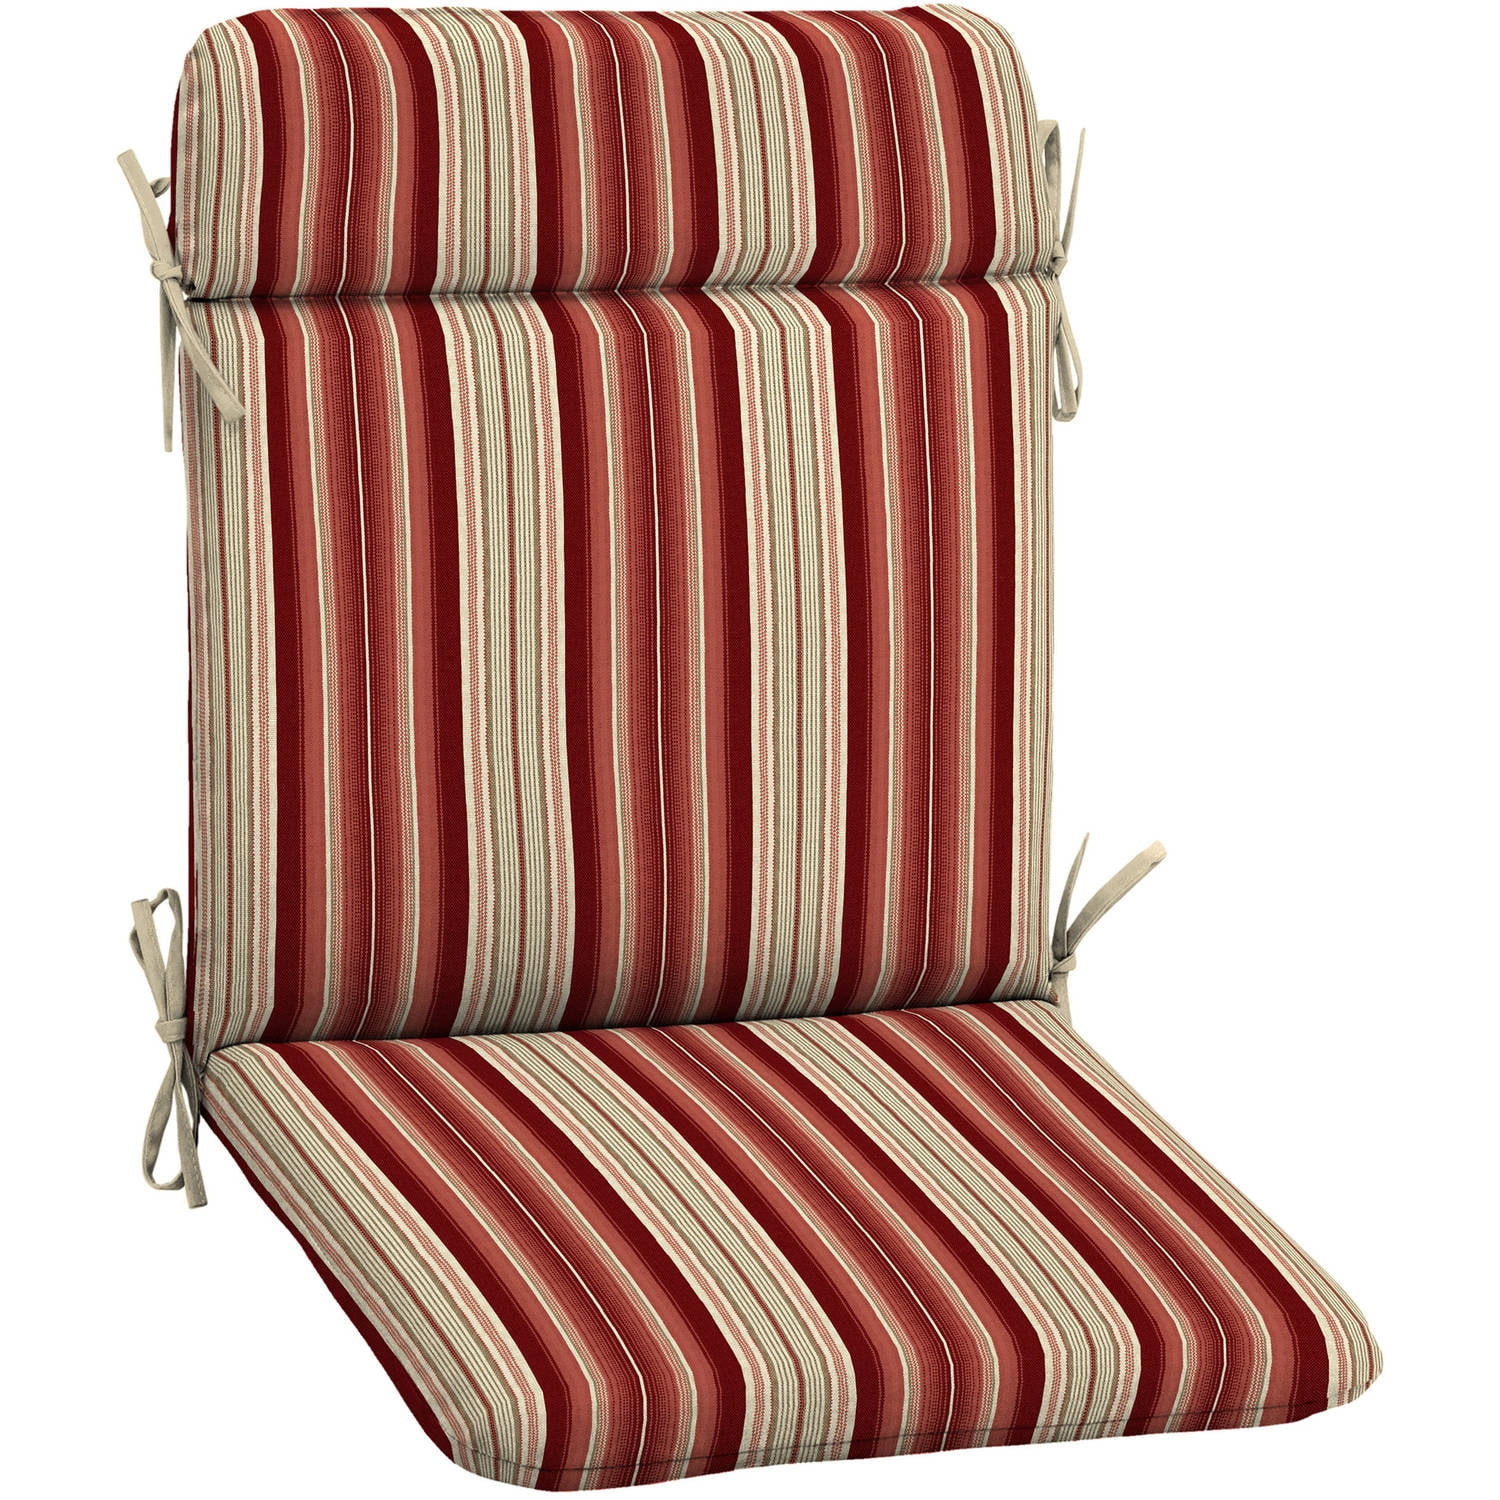 Better Homes and Gardens Outdoor Patio Mid Back Chair Cushion, Multiple